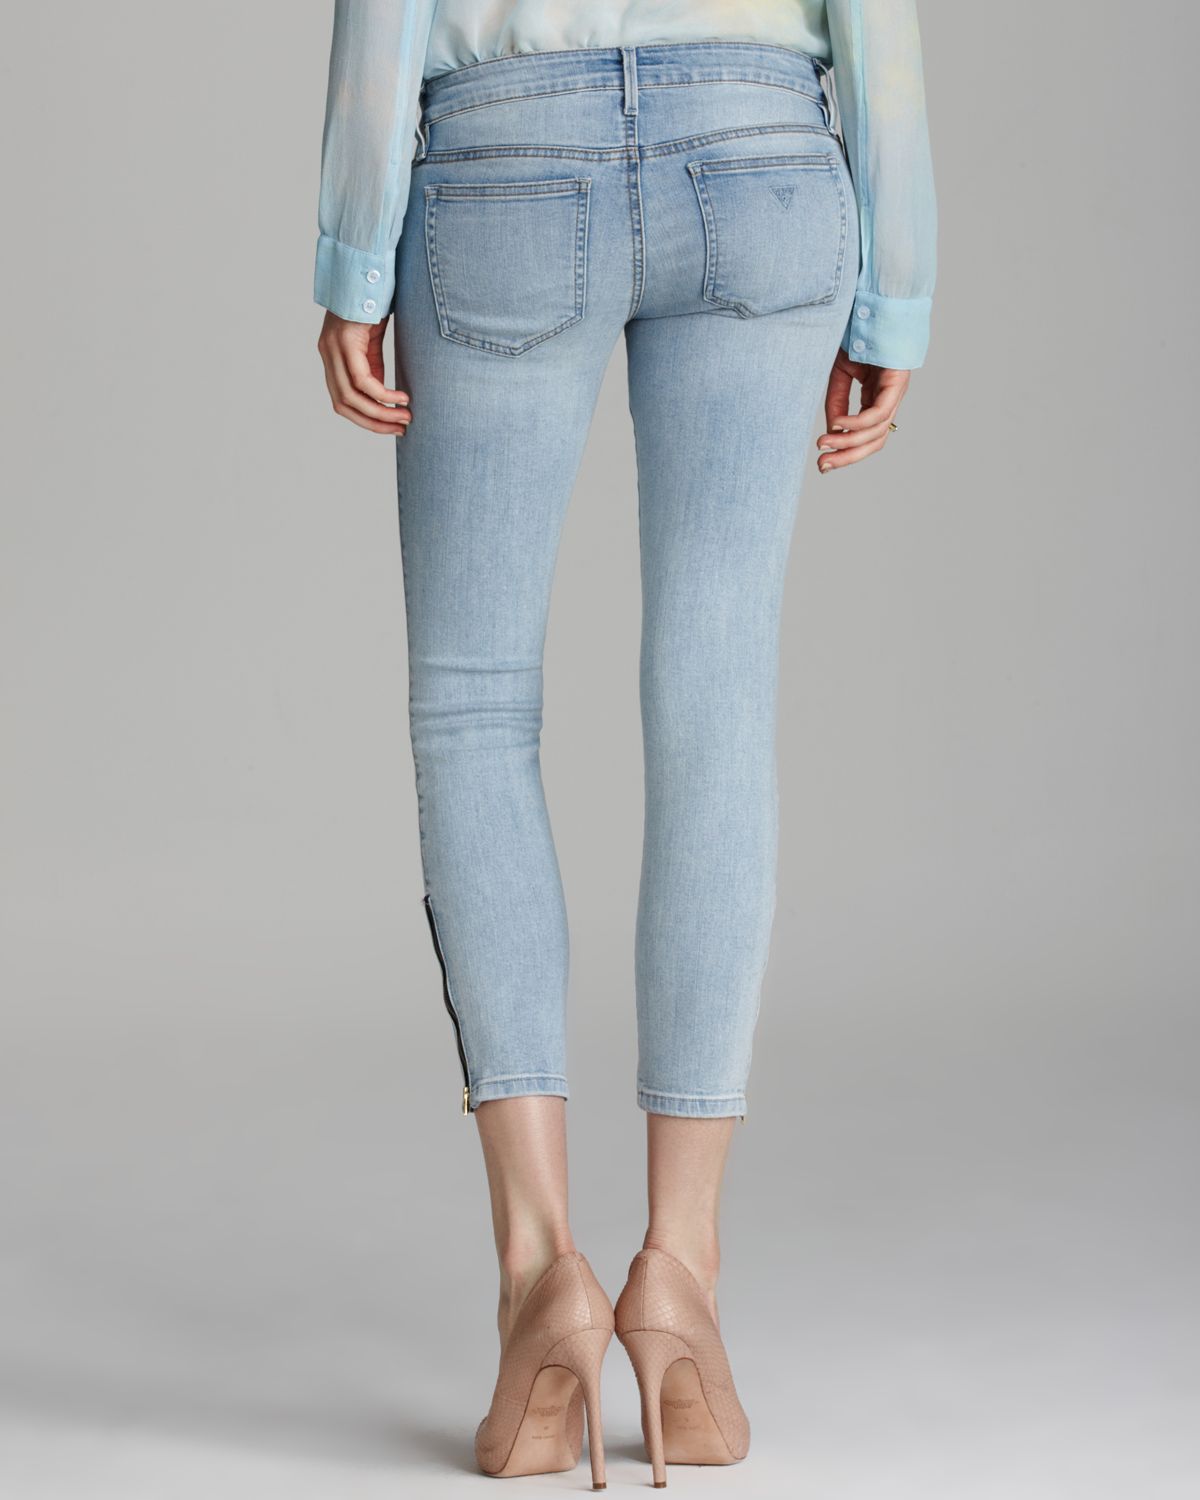 Guess Jeans Kate Crop Ankle Zip in Vintage Civil Wash in Blue | Lyst